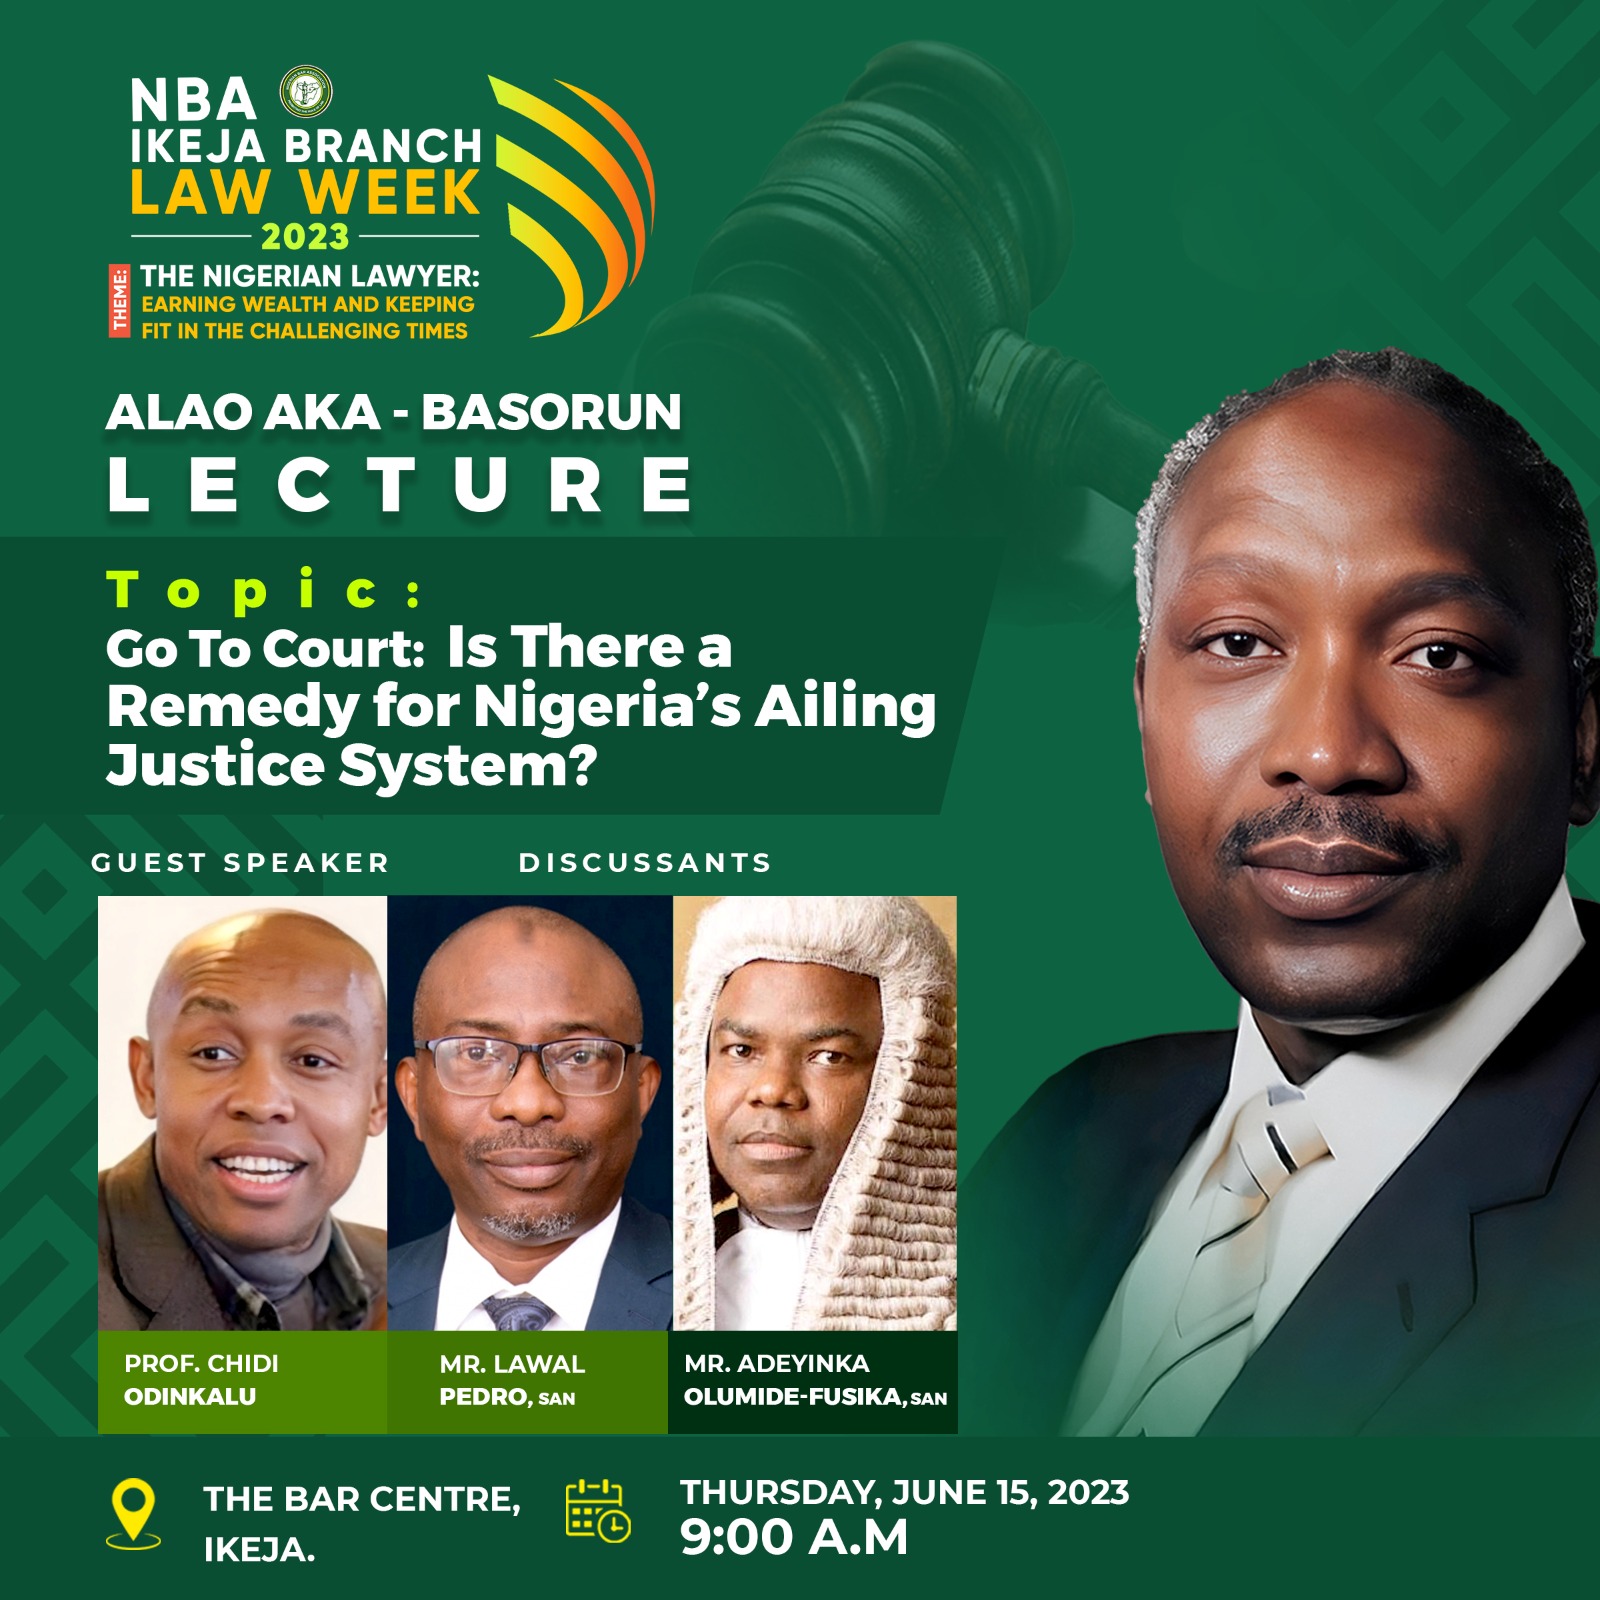 Get Ready for NBA Ikeja Branch 2023 Law Week Focusing on Nigerian Lawyers’ Wealth and Fitness – Register today.